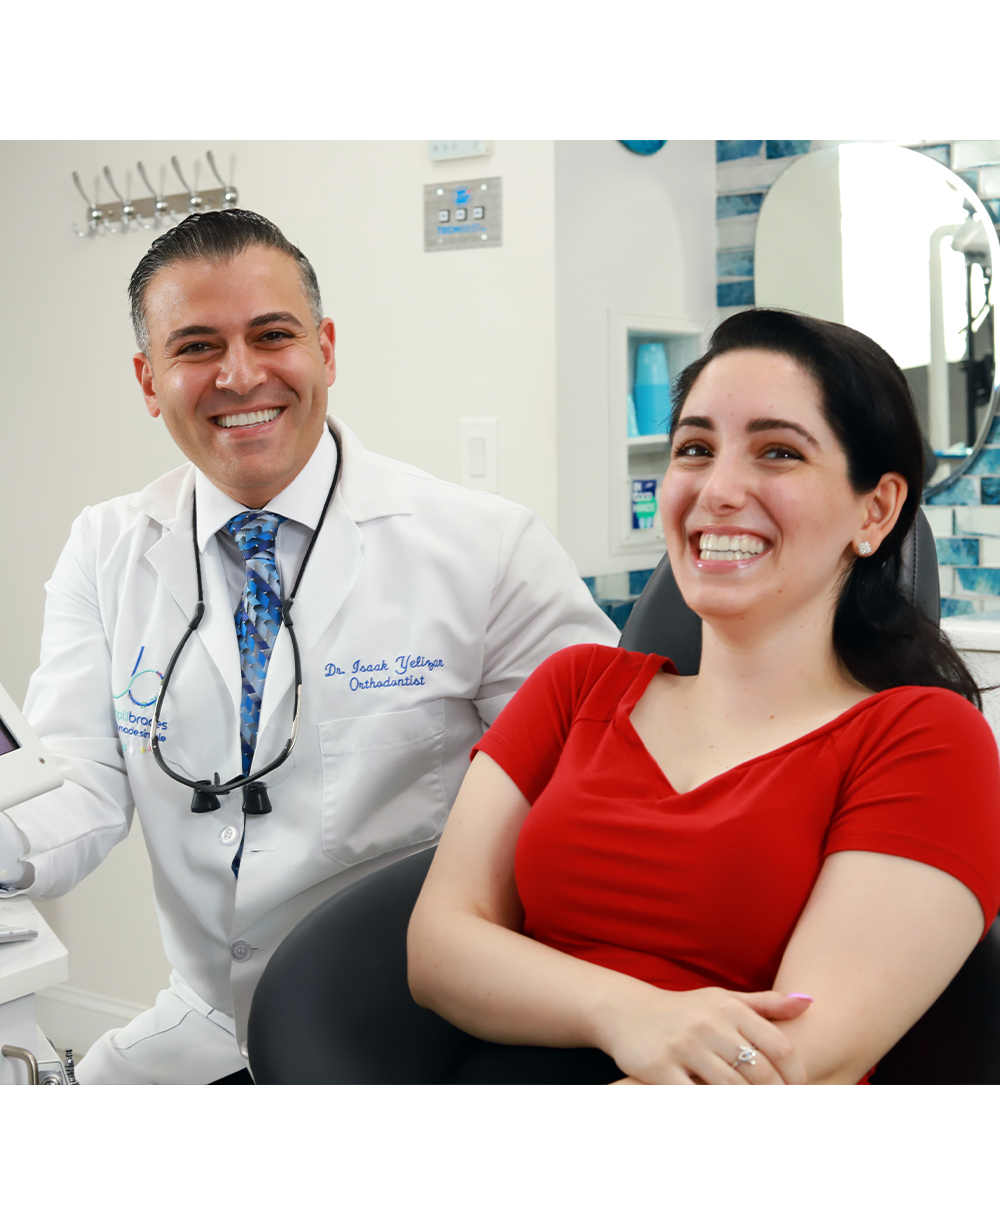 Orthodontist and patient laughing together